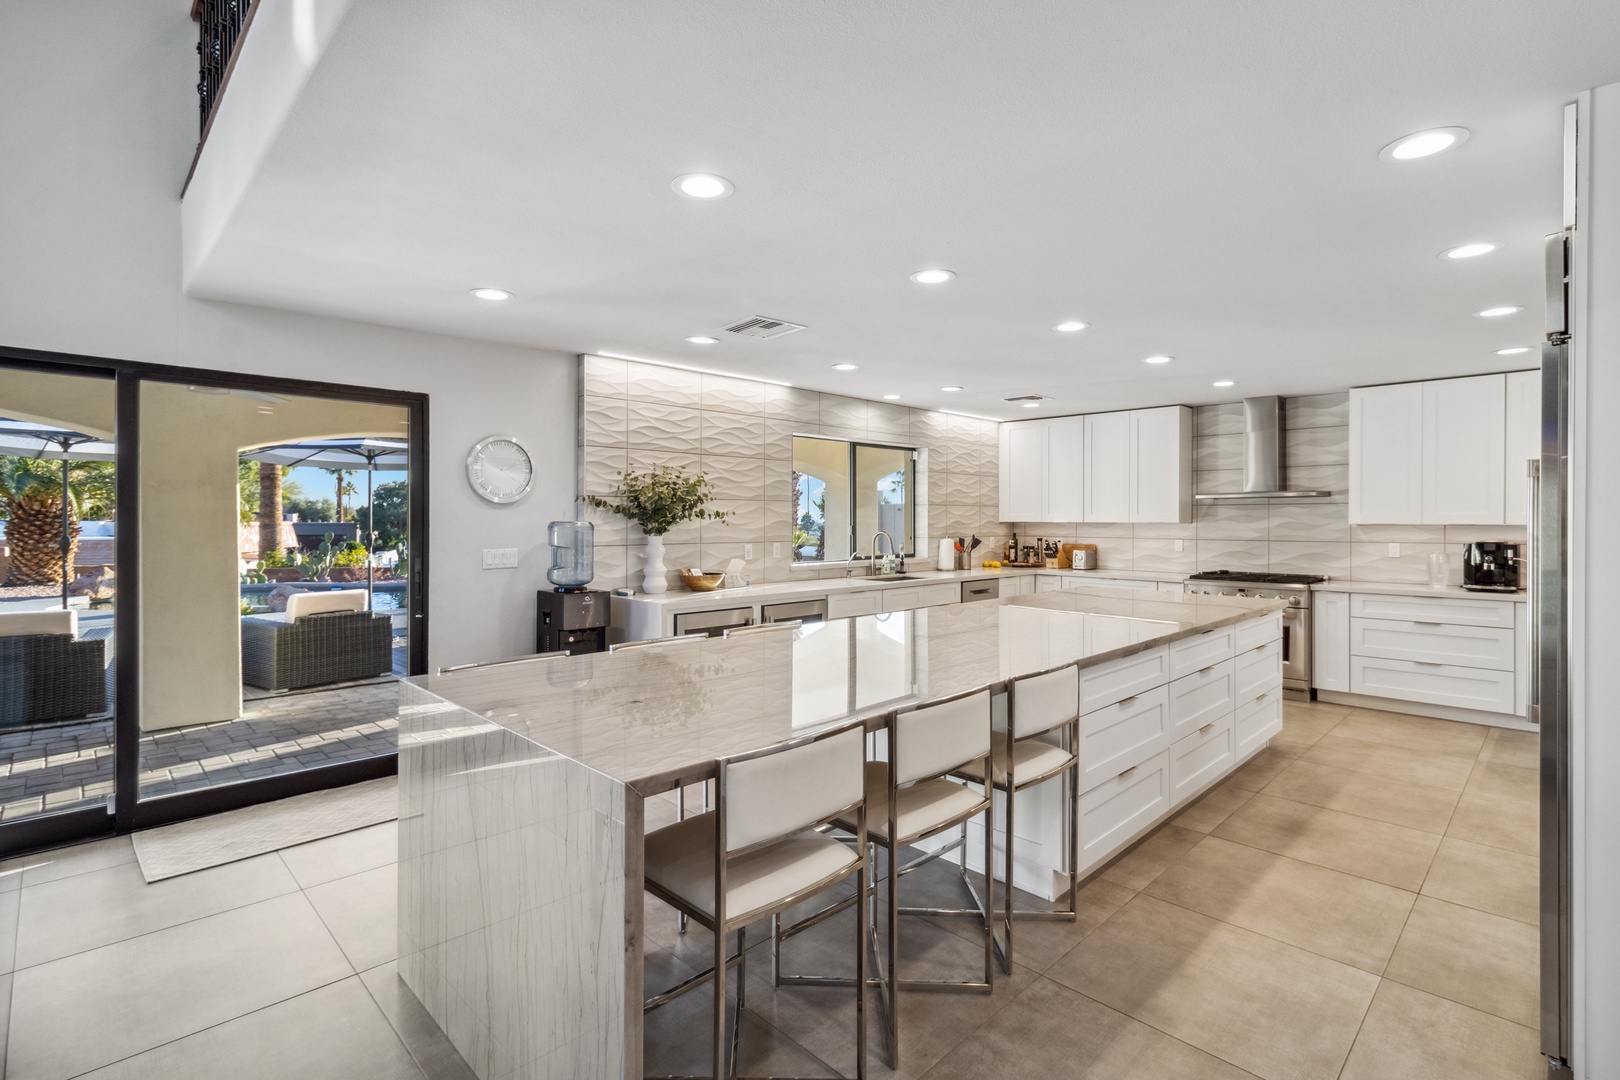 Phoenix Vacation Rentals, Majestic Mountain Views at Piestewa Peak Paradise - The modern kitchen is equipped with top-of-the-line stainless steel appliances to make your stay enjoyable. A large island includes seating for six and provides plenty of room for entertaining